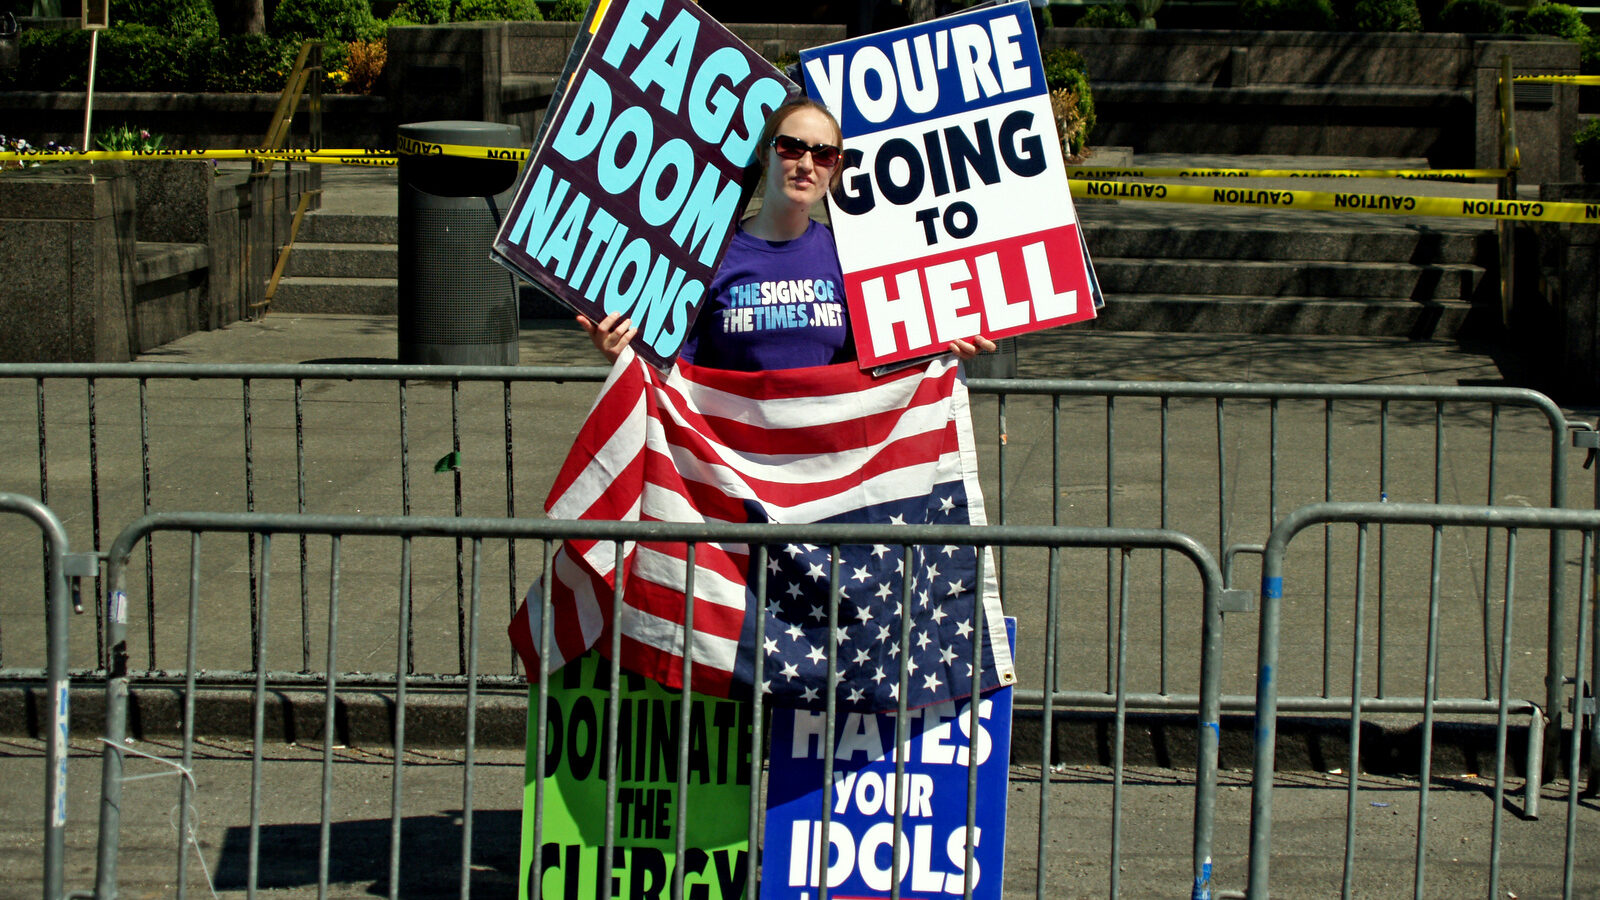 A member of the Westboro Baptist Church protesting outside the United Nations in New York City (2008).